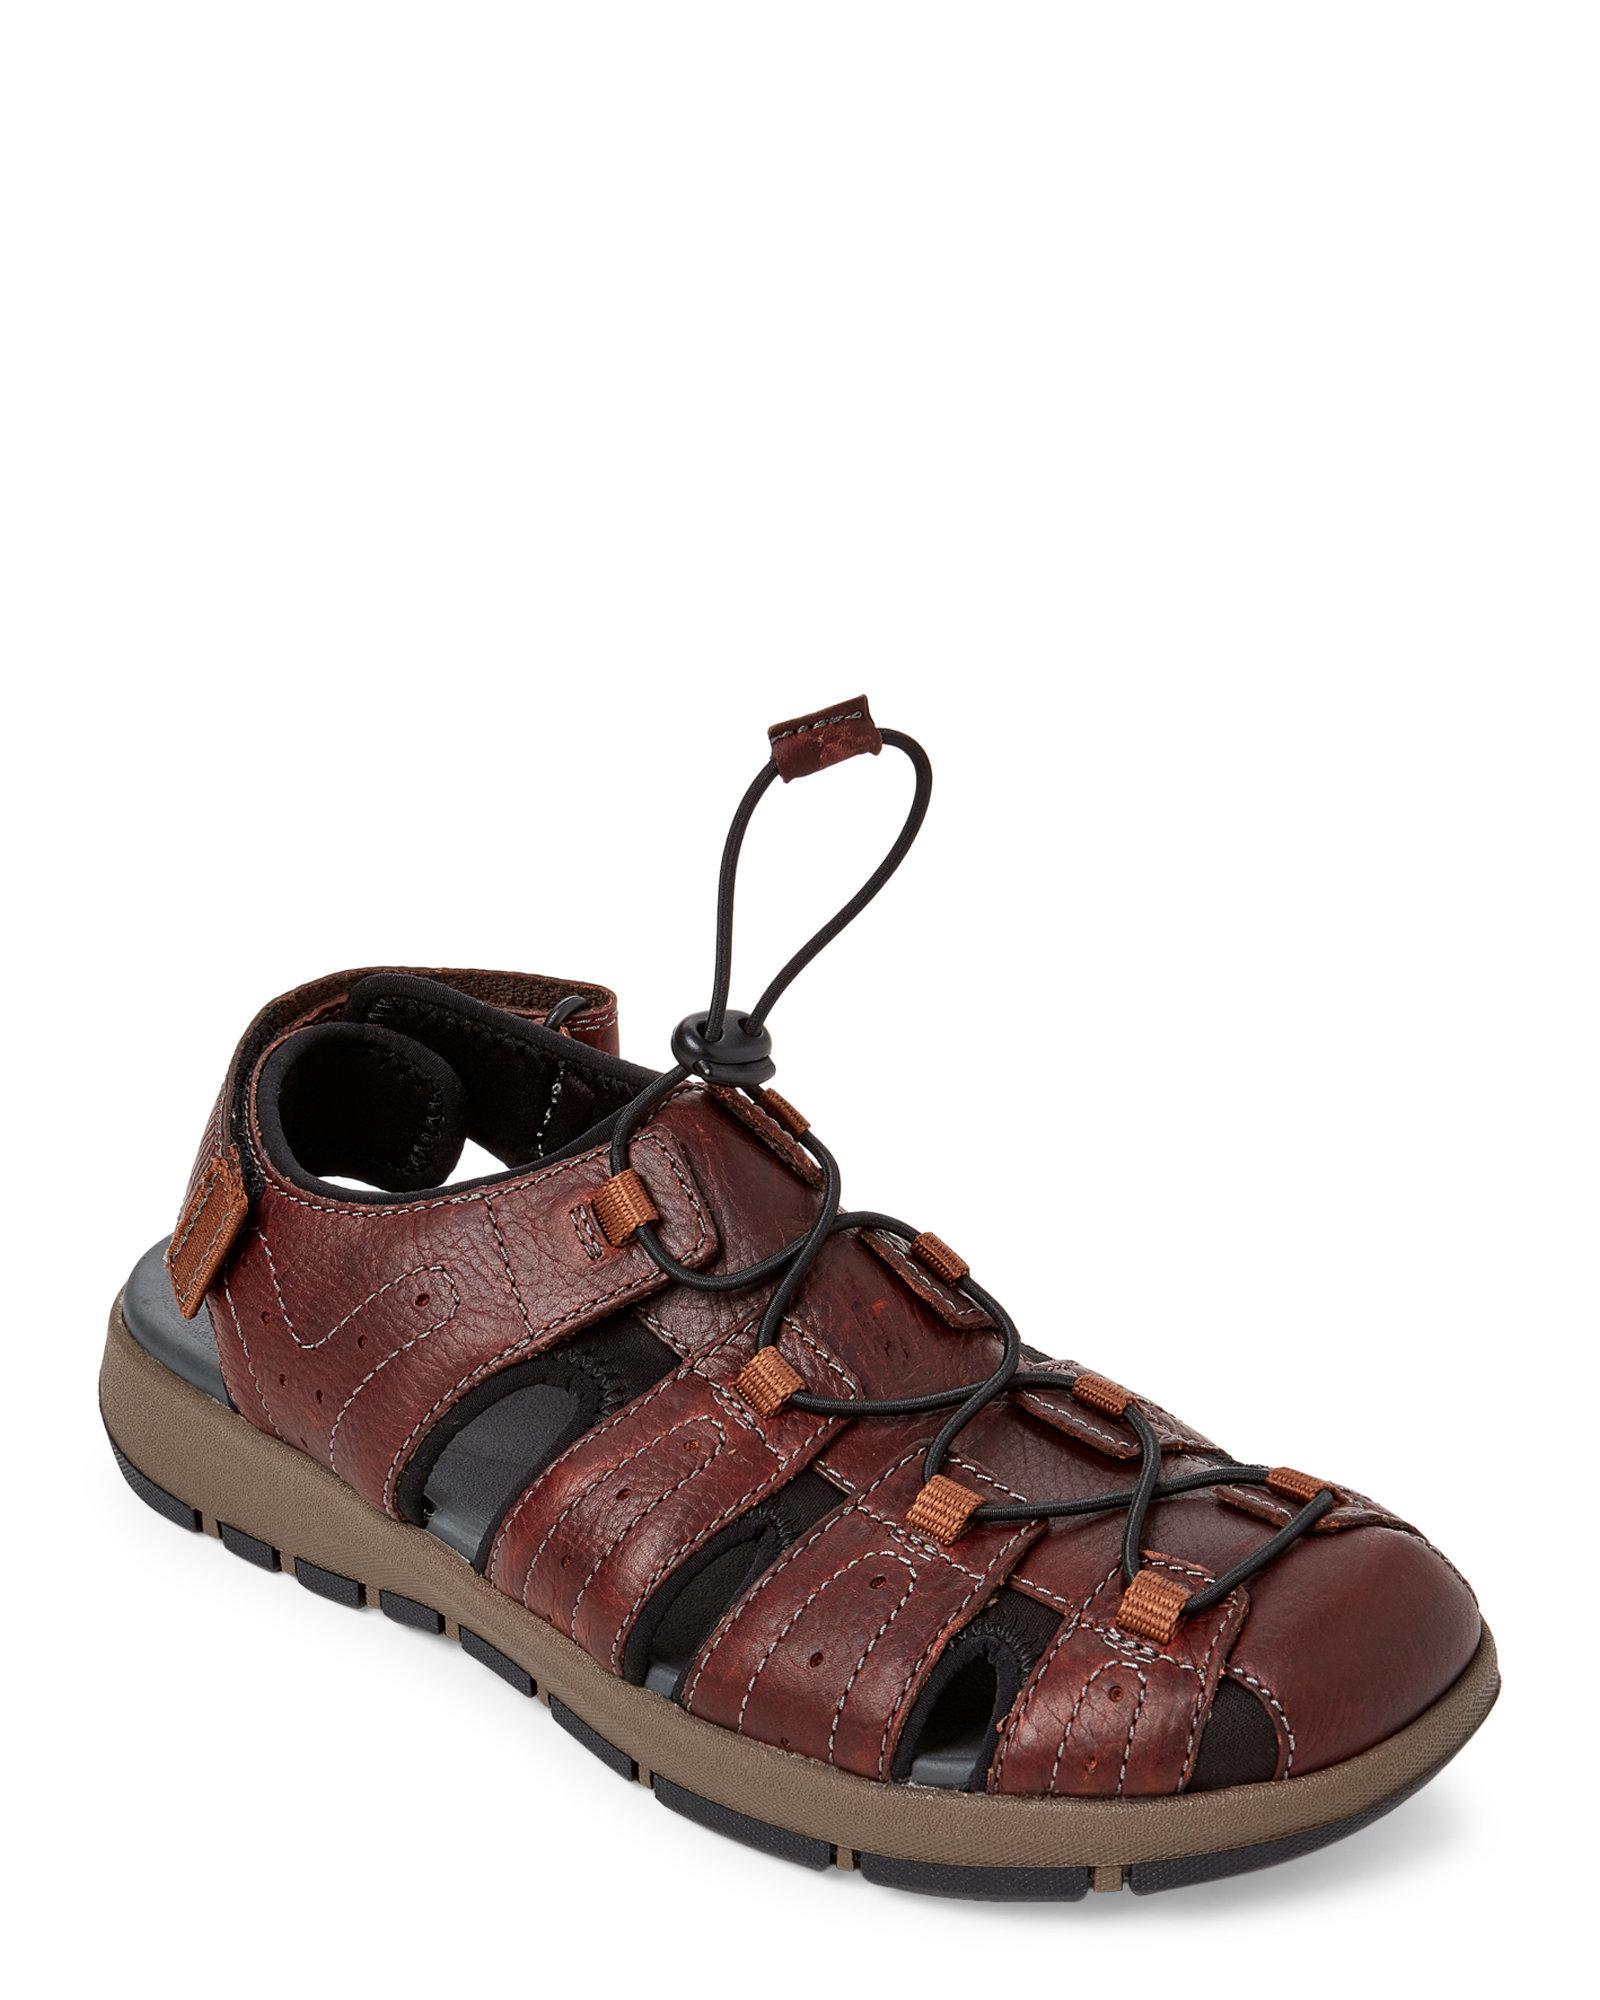 clarks brixby cove sandals